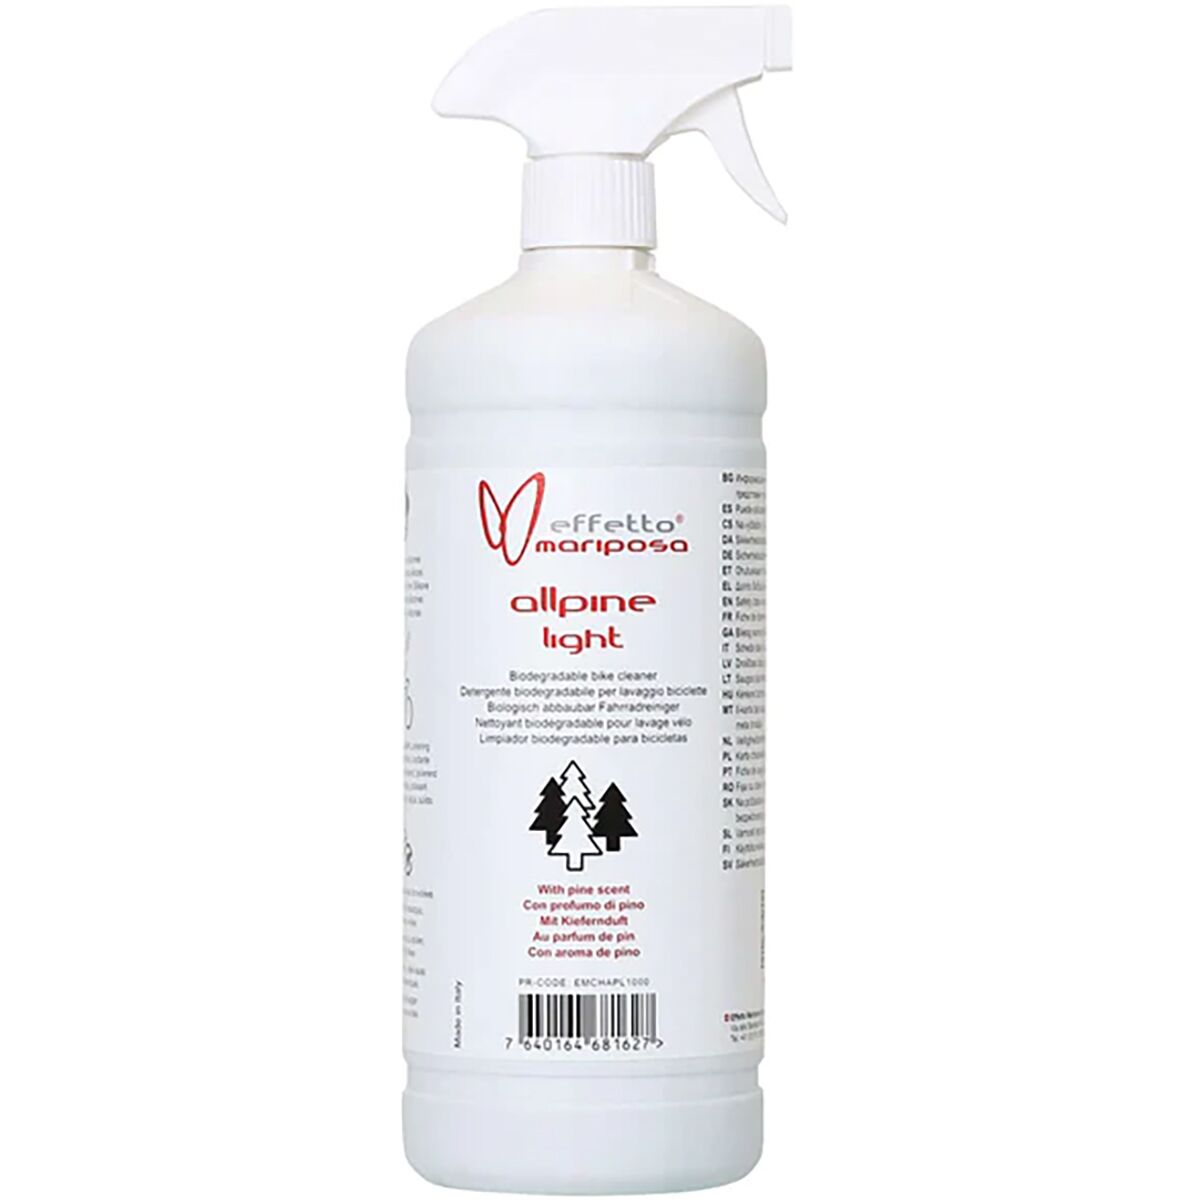 Effetto Mariposa Allpine Extra Biodegradable Bicycle Cleaner